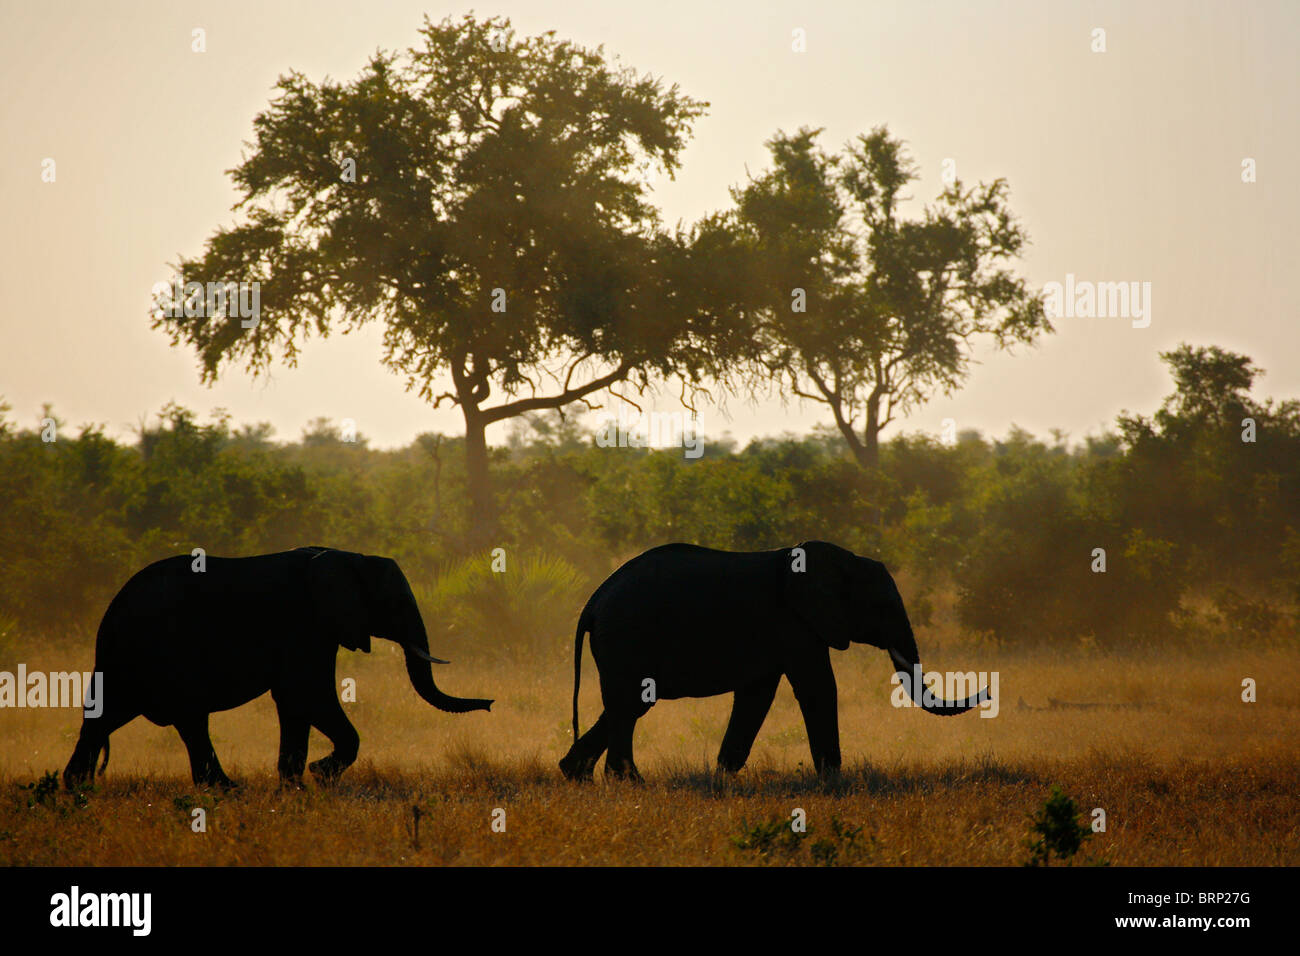 A silhouette of African elephants walking in dry veld Stock Photo